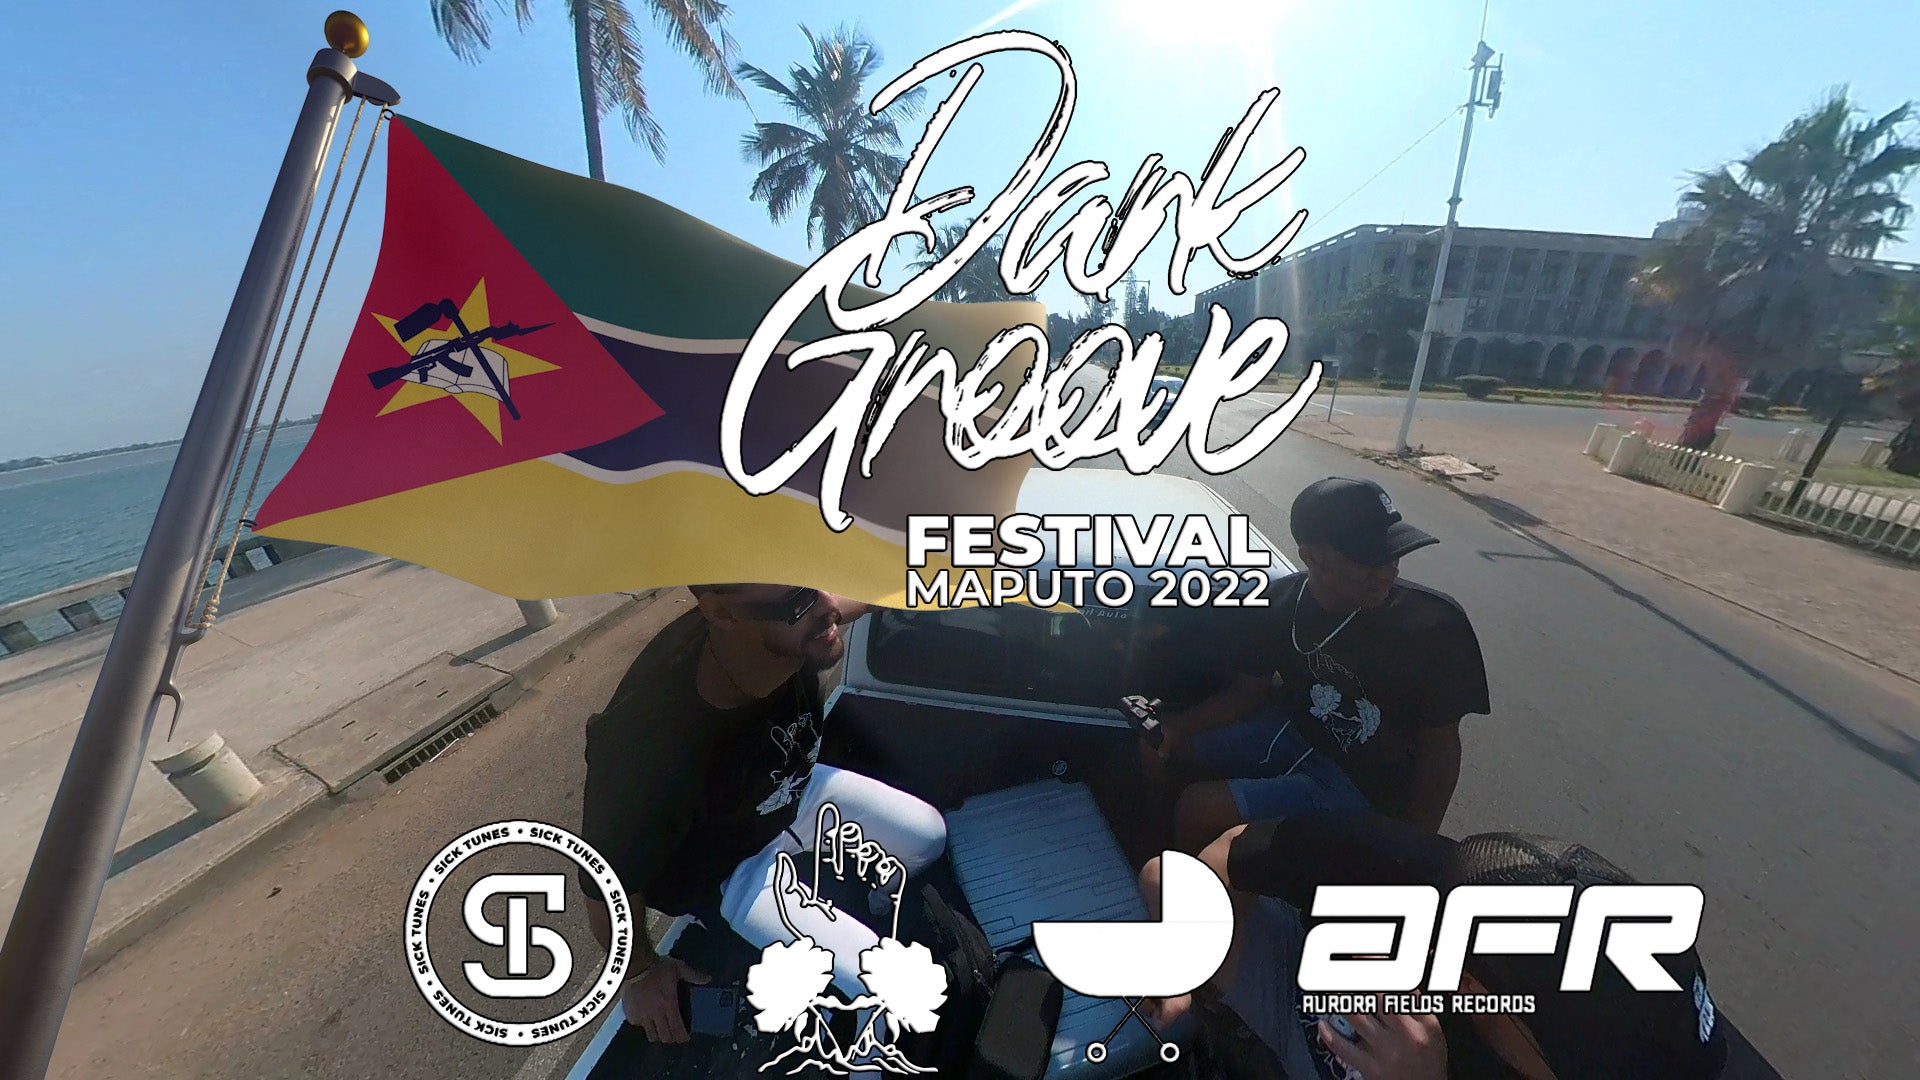 Load video: Dark Groove Festival Maputo 2022 After Movie 🖤🥀🖤 #DarkGroove #TEAMPERDITIO video by Sick Tunes Media